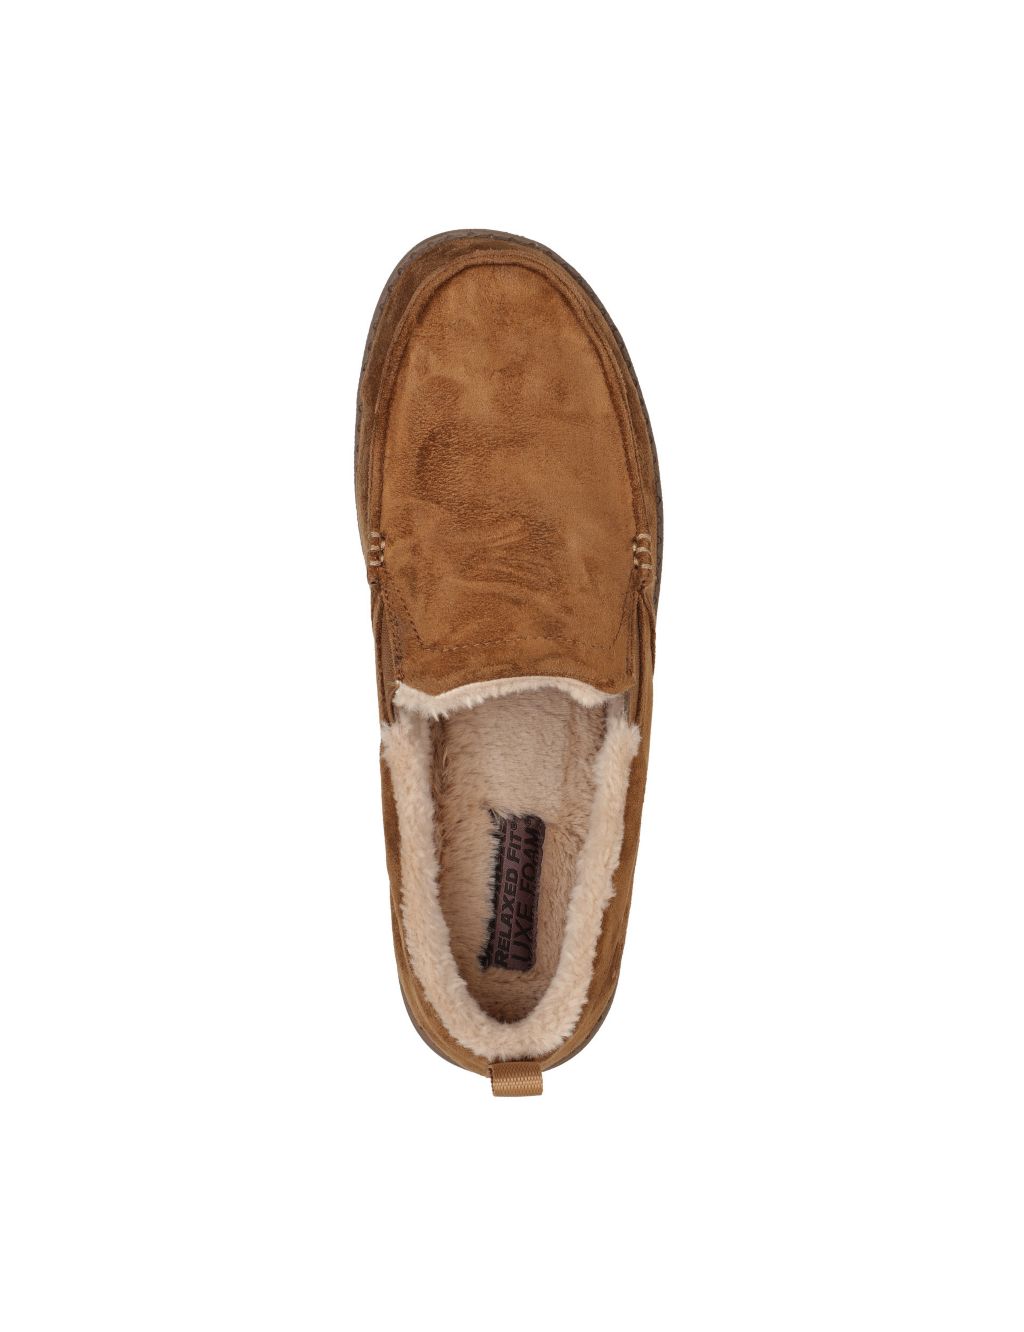 Melson Willmore Moccasin Slippers | Skechers | M&S